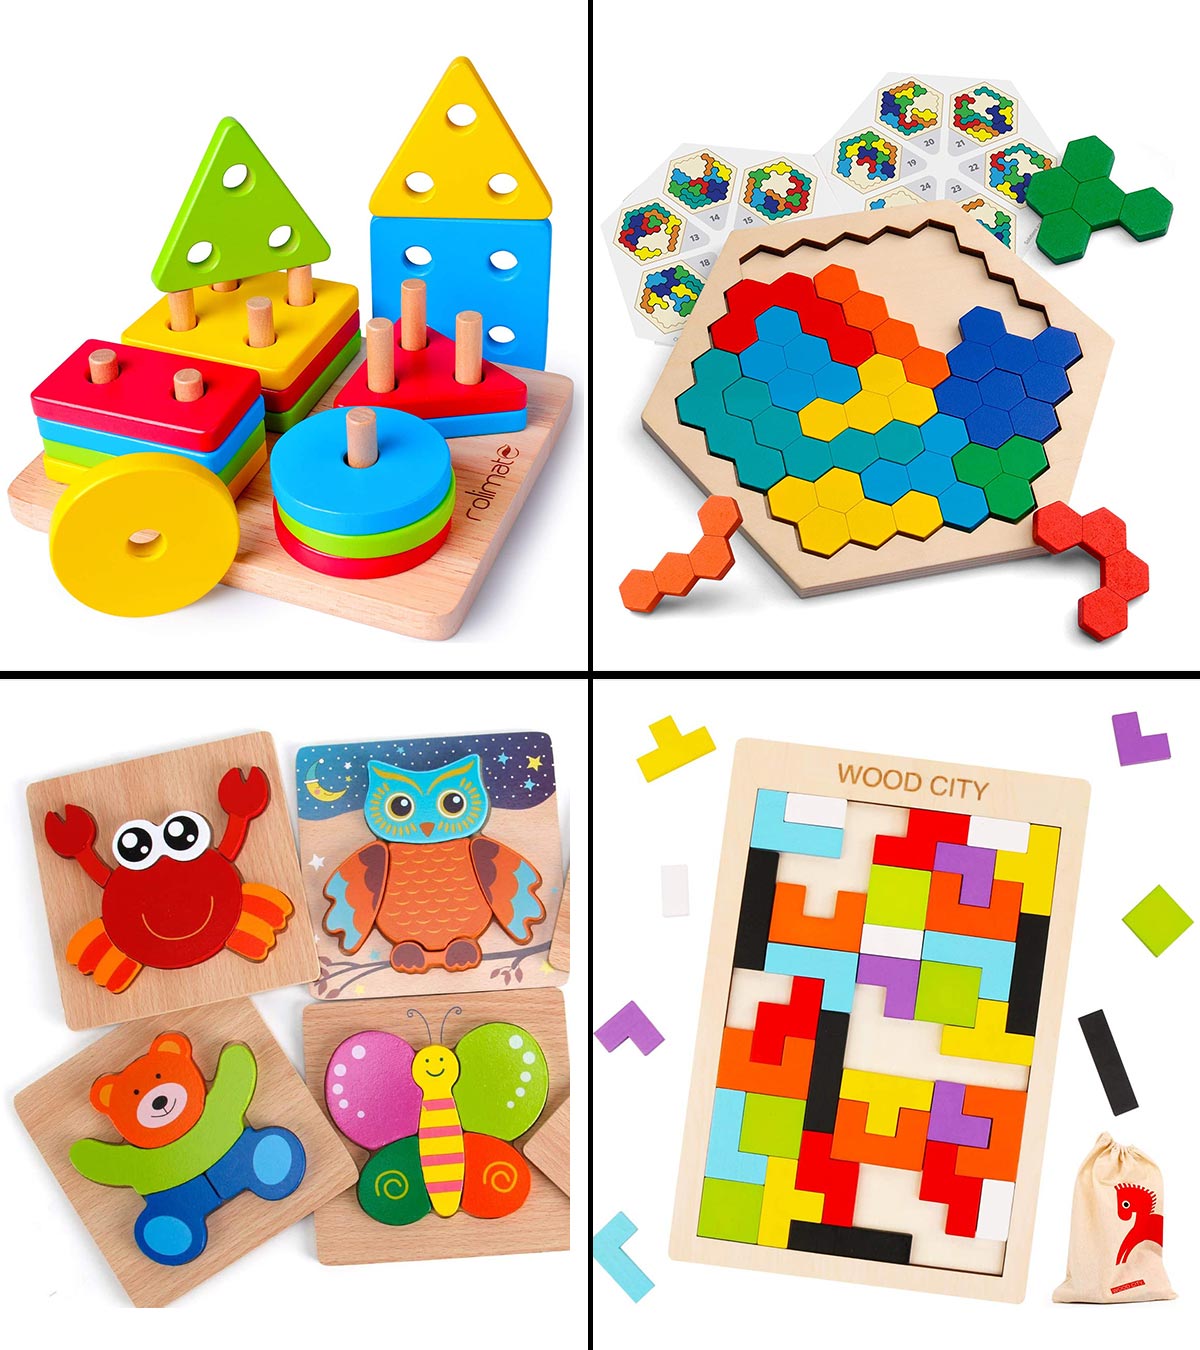 6 in 1 Cube 3D Wooden Puzzle and A Set of Wooden Tangram Childrens Educational Toys Marine Animal Childrens Brain Thinking and Imagination Stimulation Eye-Hand Coordination Exercise 